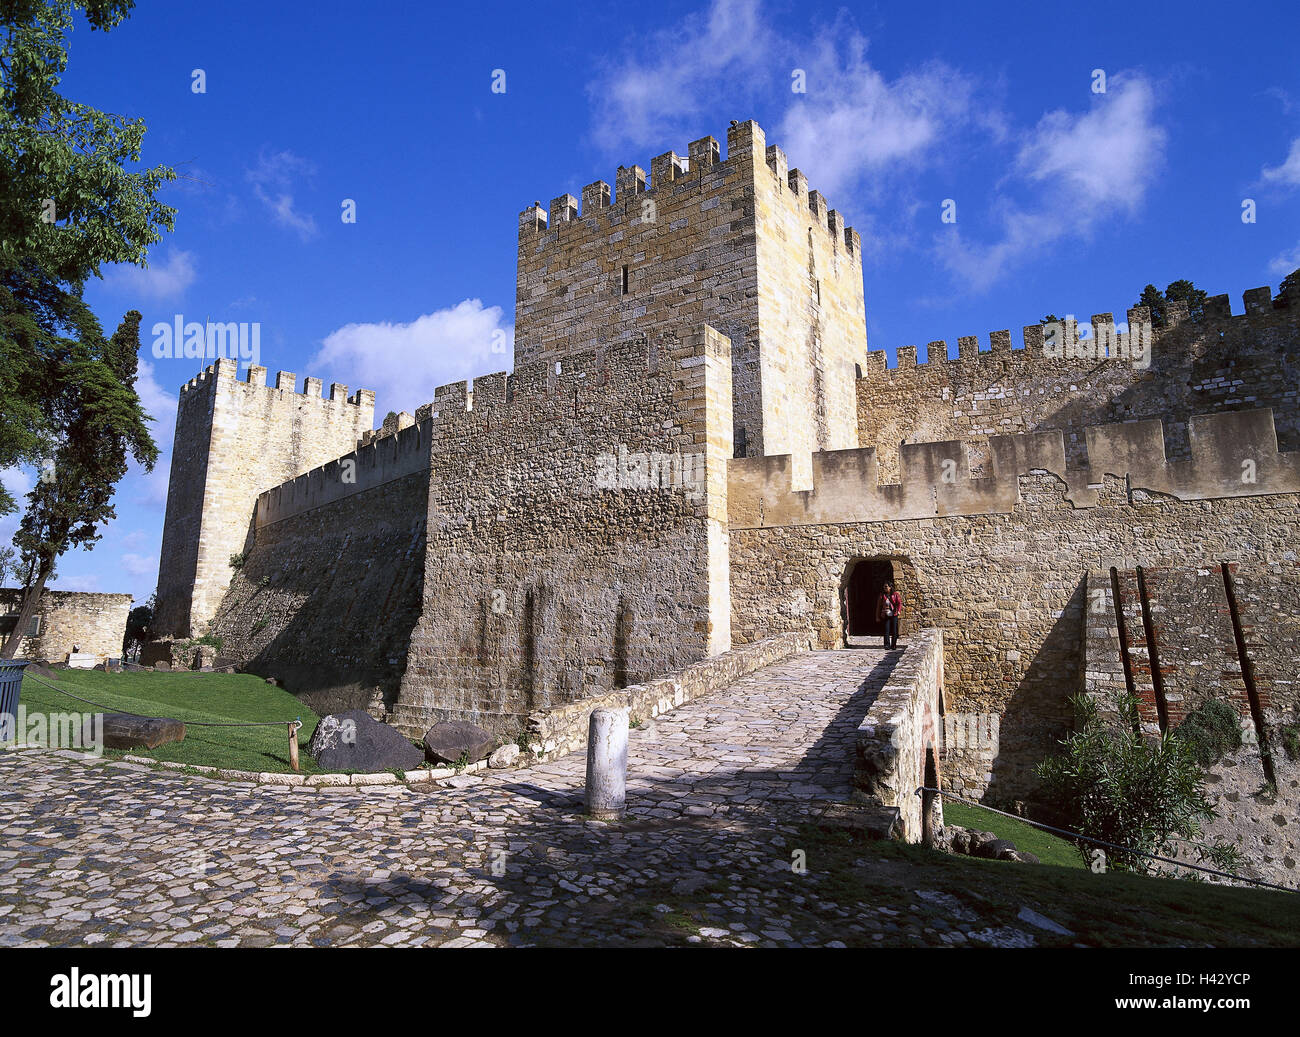 Portugal, Lisbon, Castello Sao Jorge, main entrance, Europe, town, capital, fort, Alkazar, fortress, castle, castle defensive wall, tower, towers, architectural style, structure, passer-by, tourist, tourism, cloudy sky, place of interest, architecture, historically, story Stock Photo